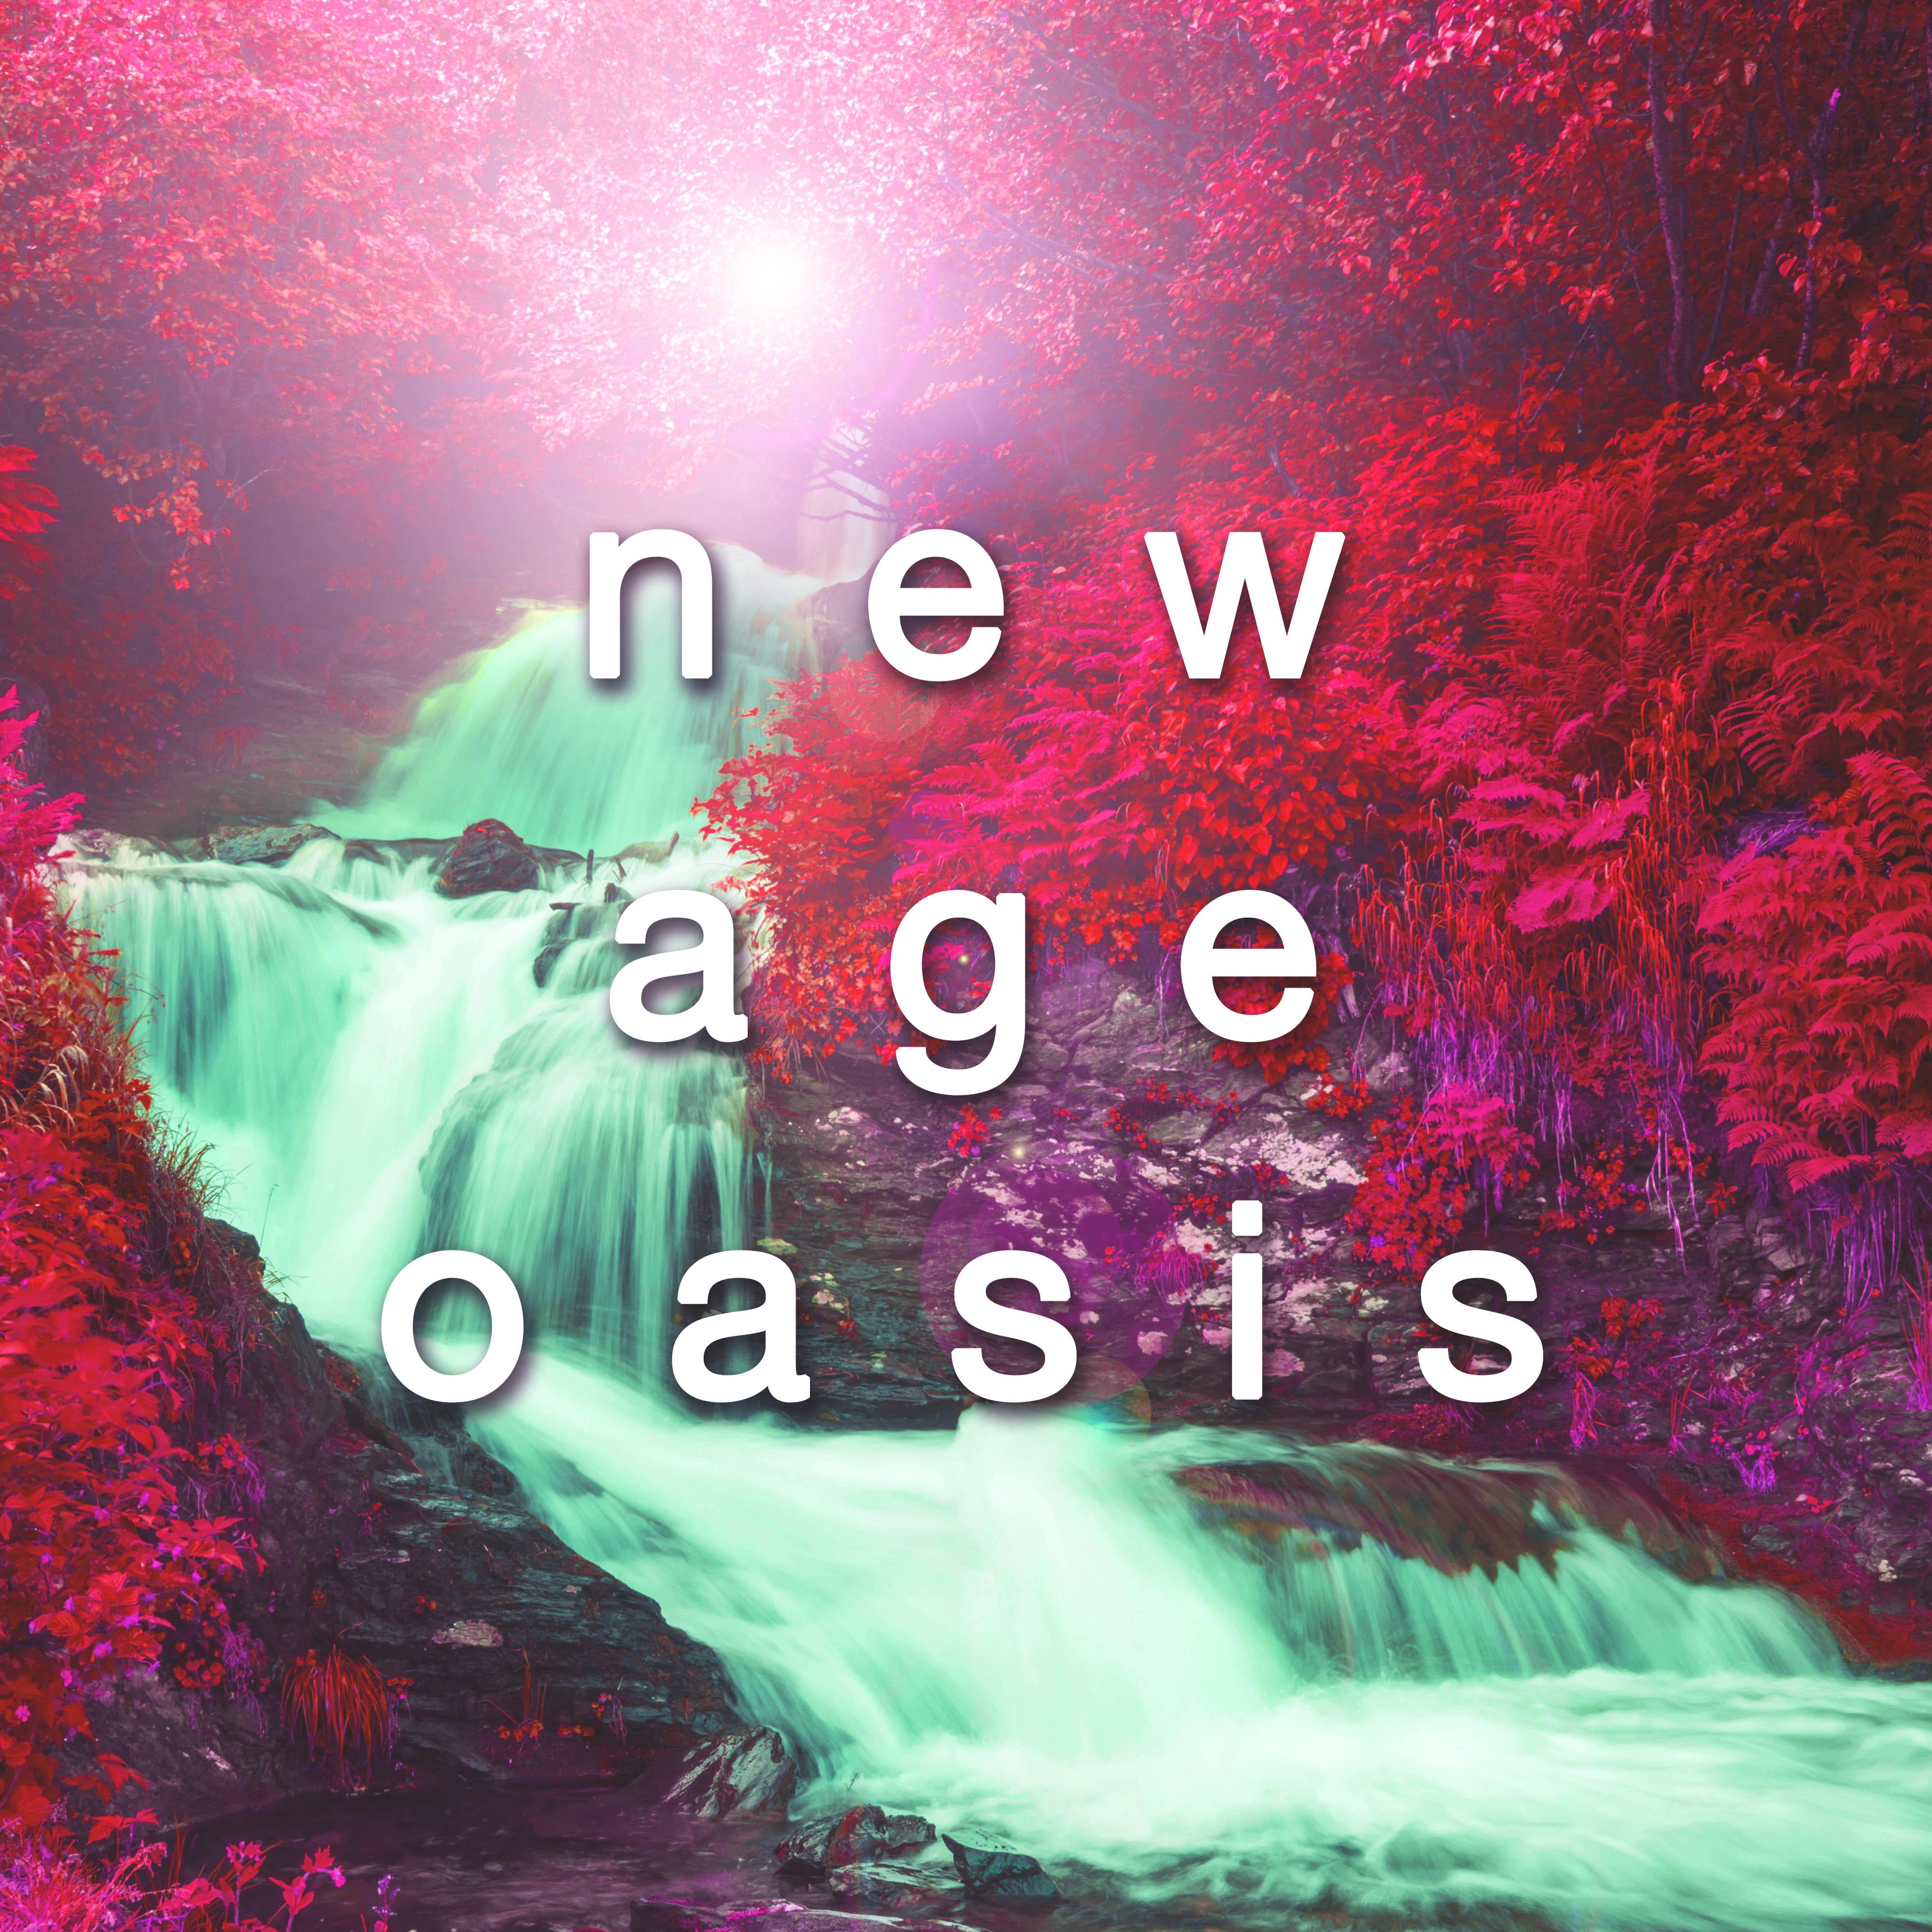 New Age Oasis - Nature & Ambient Sounds for Relaxation